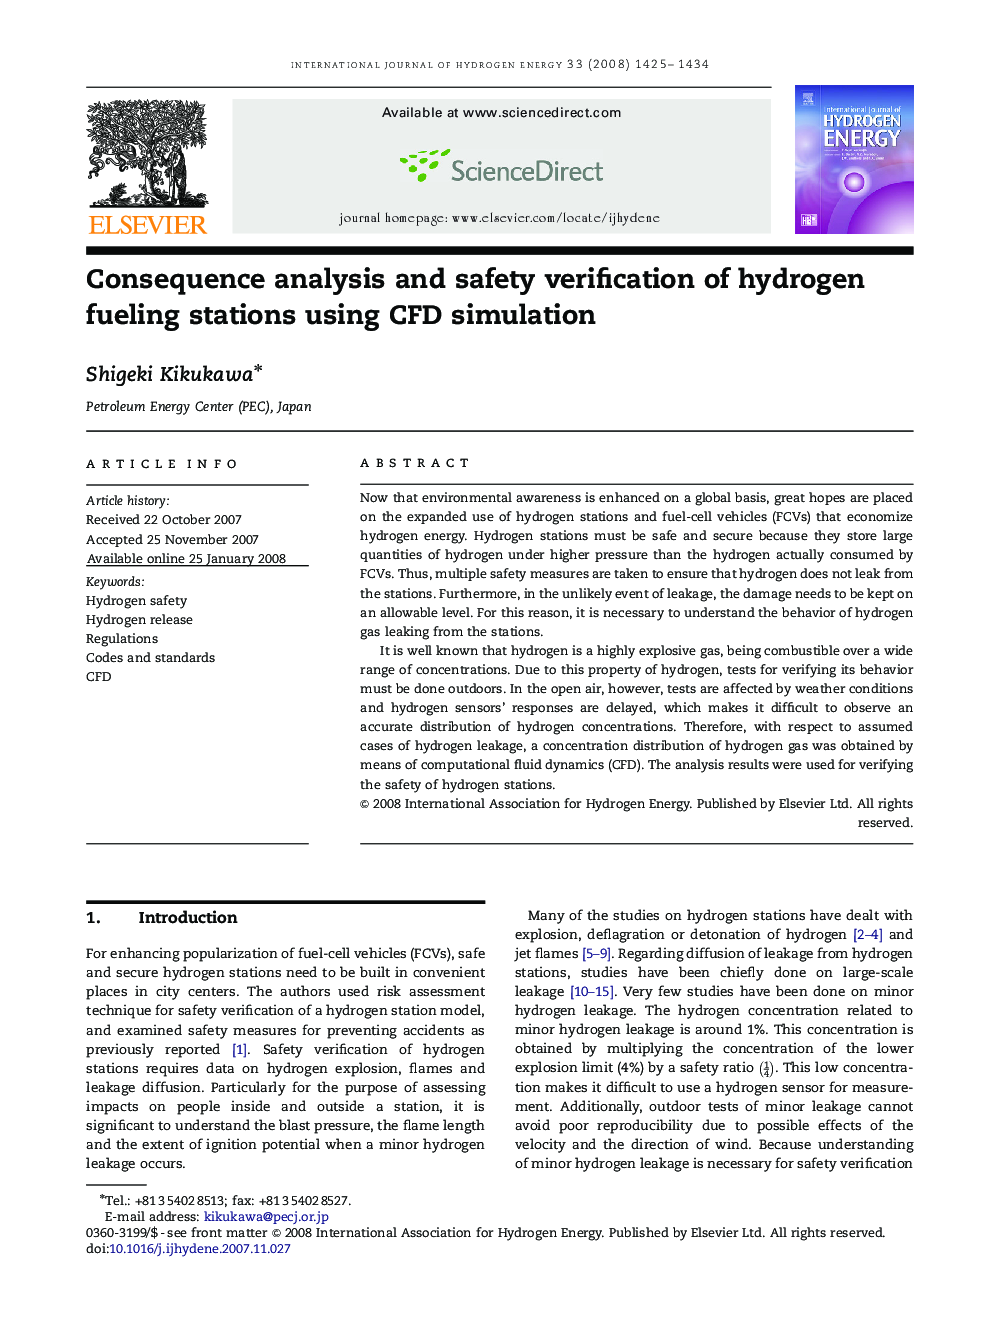 Consequence analysis and safety verification of hydrogen fueling stations using CFD simulation